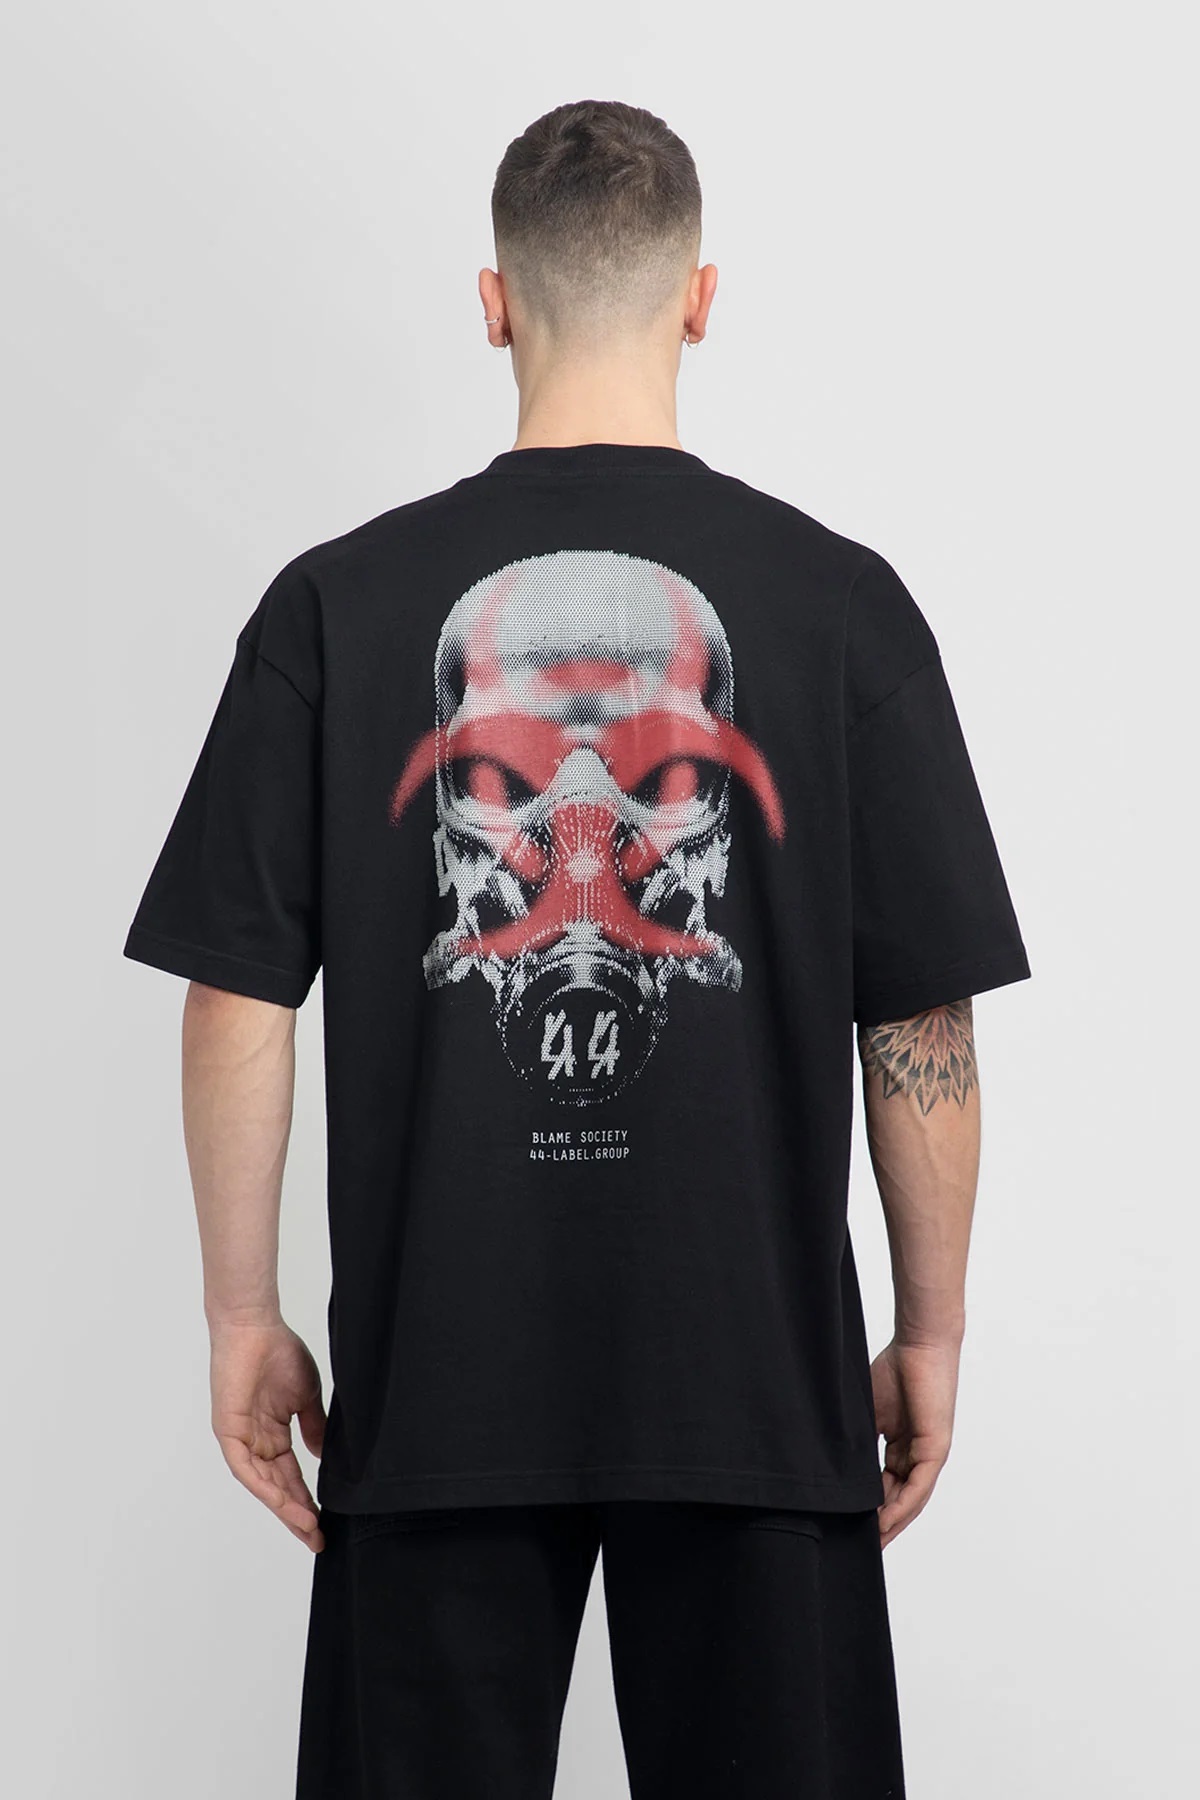 44 LABEL GROUP Fallout T-Shirt in Black M